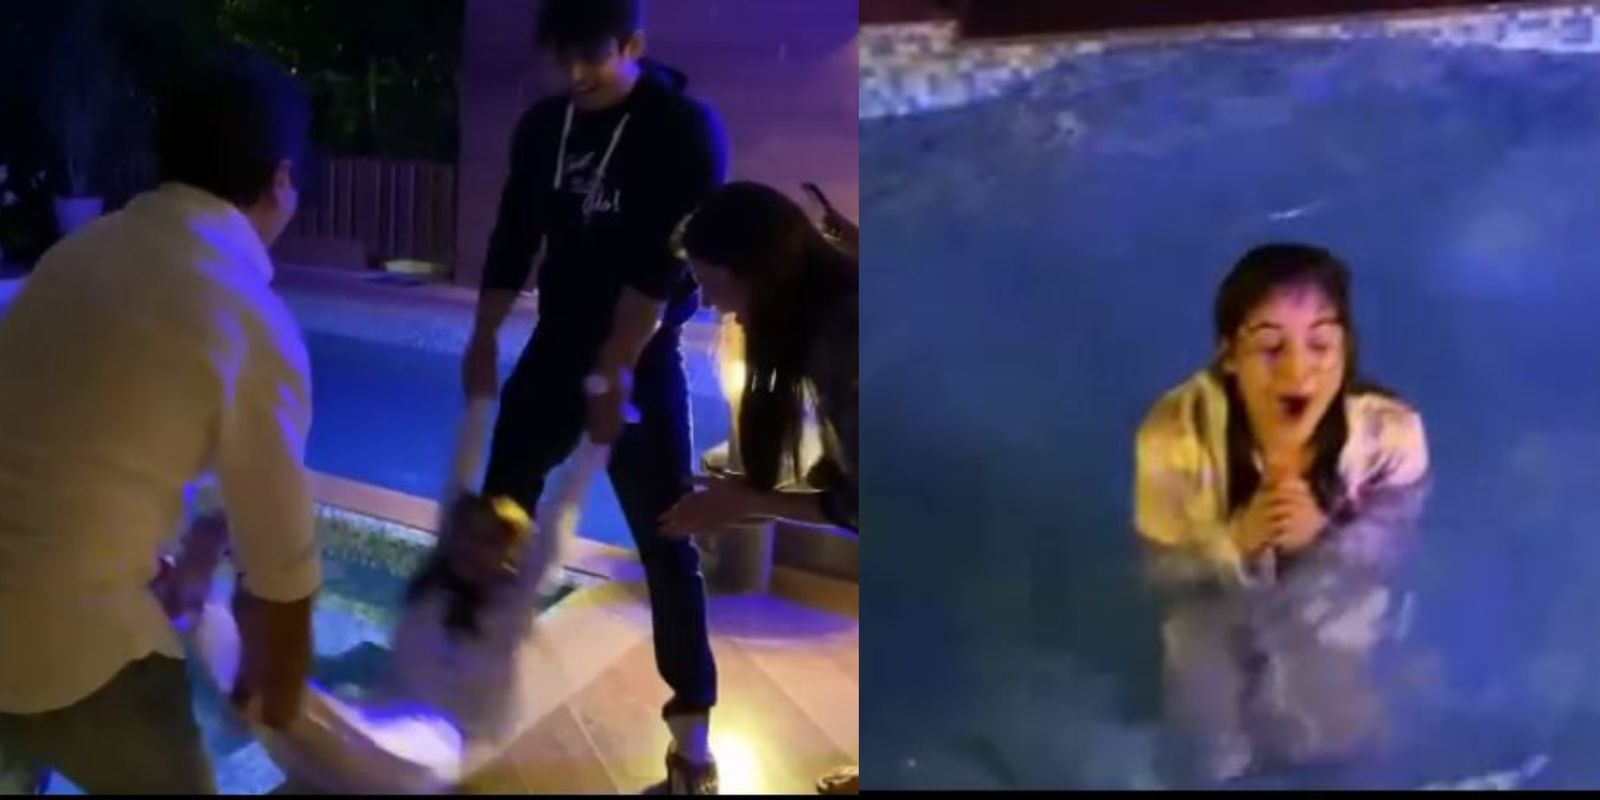 Sidharth Shukla Throws Shehnaaz Gill Into The Pool On Her Birthday, Latter Shares A Glimpse Of The Celebrations